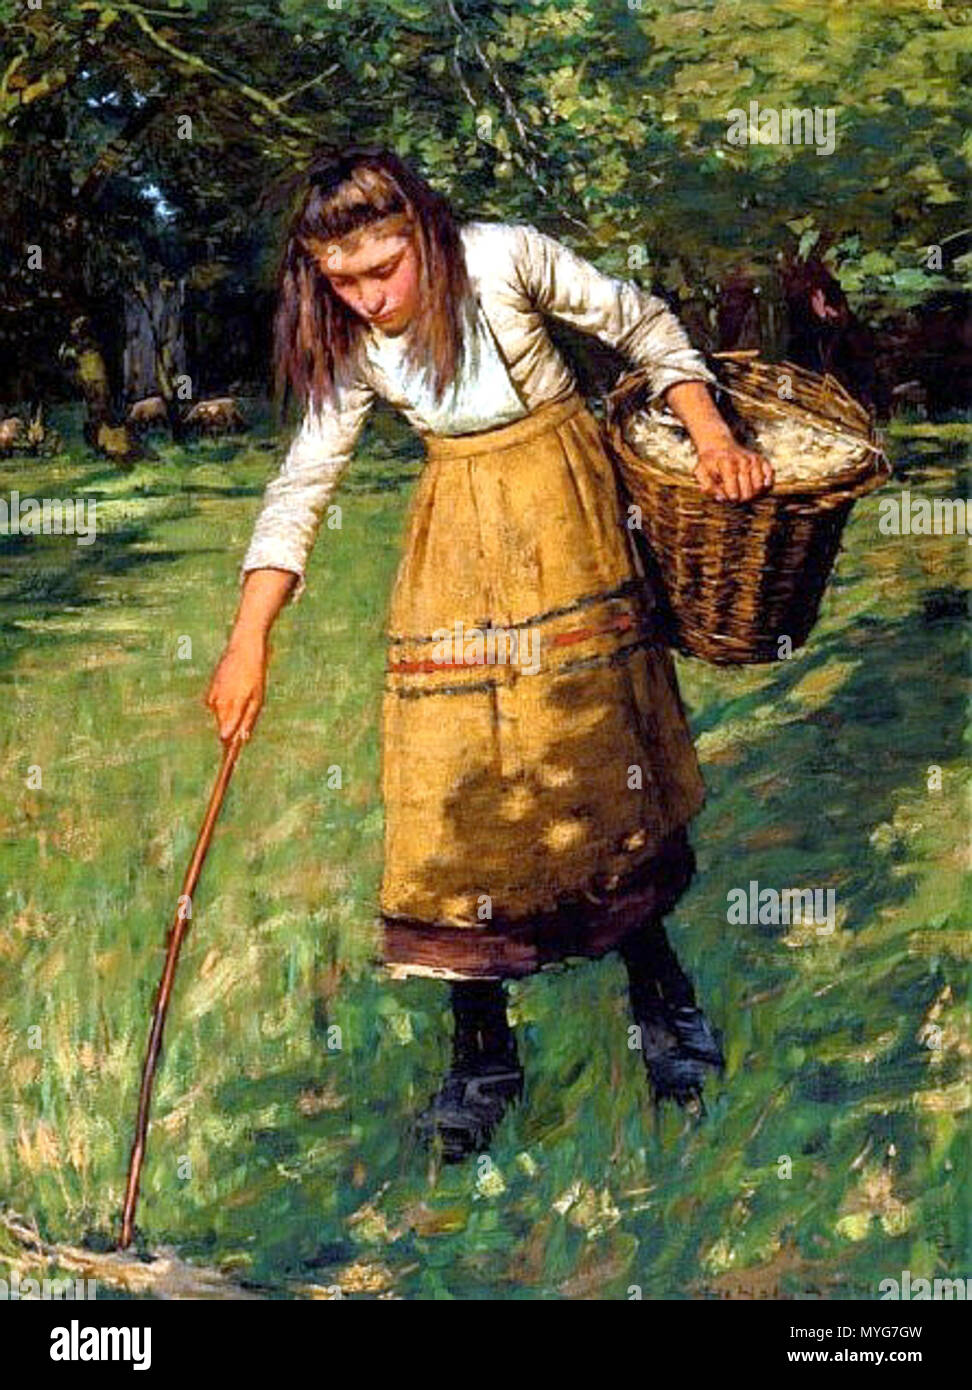 . Gathering Wool . Unknown date.    Henry Herbert La Thangue  (1859–1929)     Alternative names Henry Herbert LaThangue; Henry La Thangue; Henry Herbert la Thangue; Henry Herbert Lathangue; La Thangue  Description English painter Realist painter and associated with the Newlyn School  Date of birth/death 19 September 1859 21 December 1929  Location of birth/death London London  Work location Bretagne, London, Category:Norfolk  Authority control  : Q1606851 VIAF: 25469415 ISNI: 0000 0000 6681 1384 ULAN: 500004645 LCCN: n89654016 WGA: LA THANGUE, Henry Herbert WorldCat 236 Henry Herbert La Thangu Stock Photo